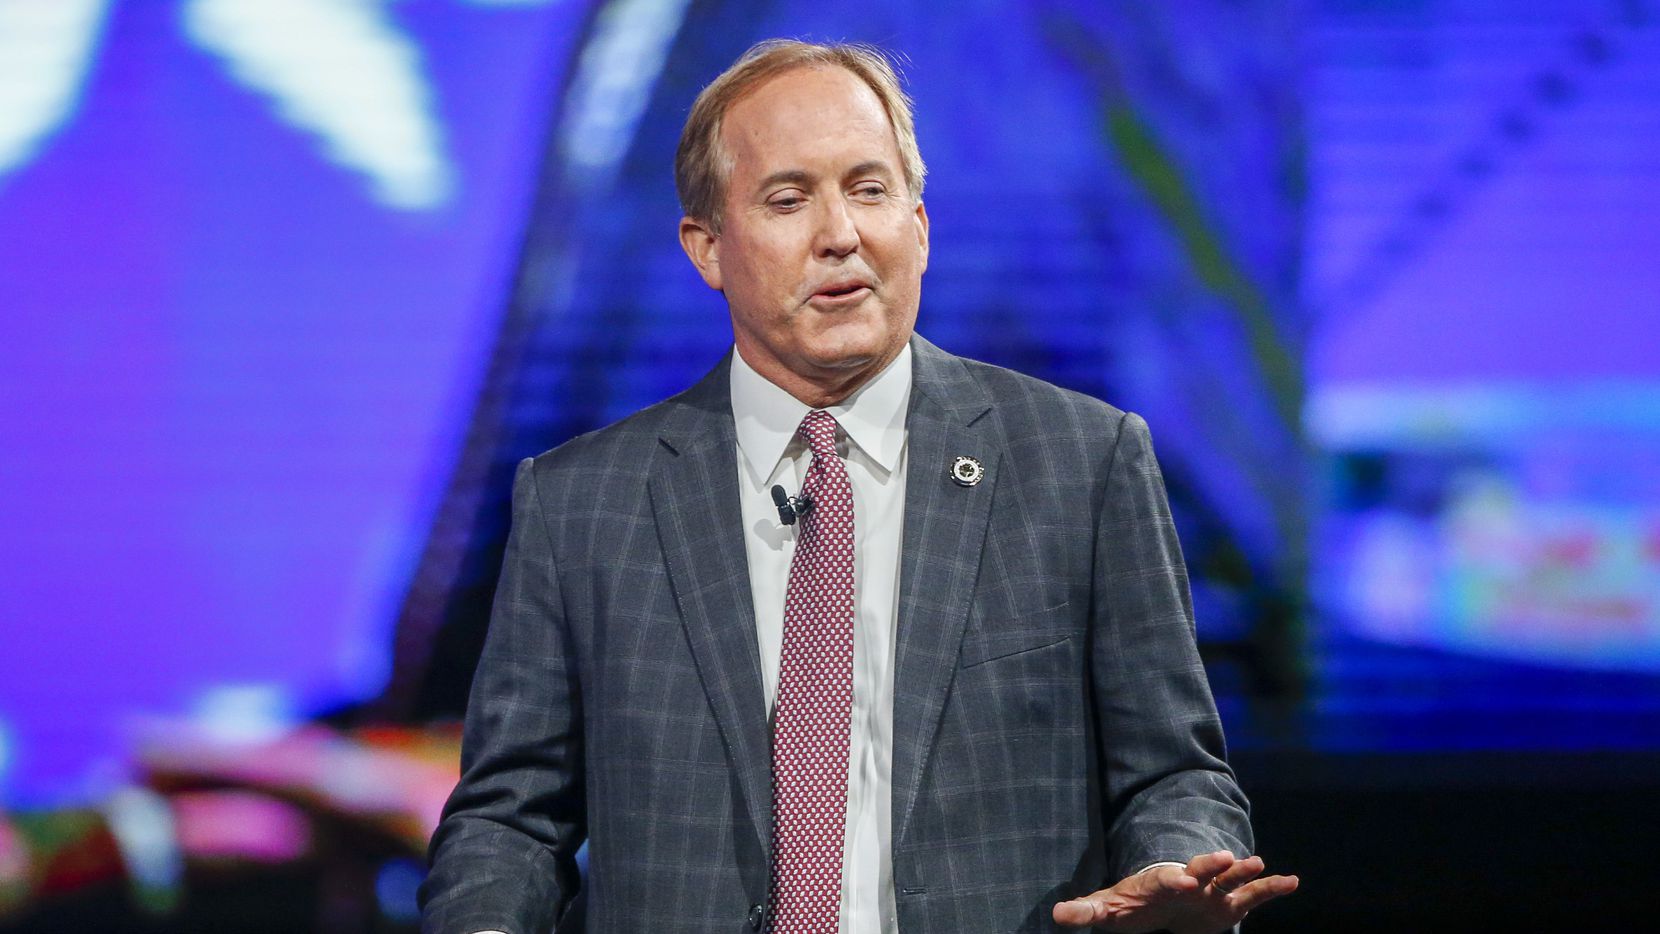 Texas Attorney General Ken Paxton gives remarks at the Conservative Political Action...